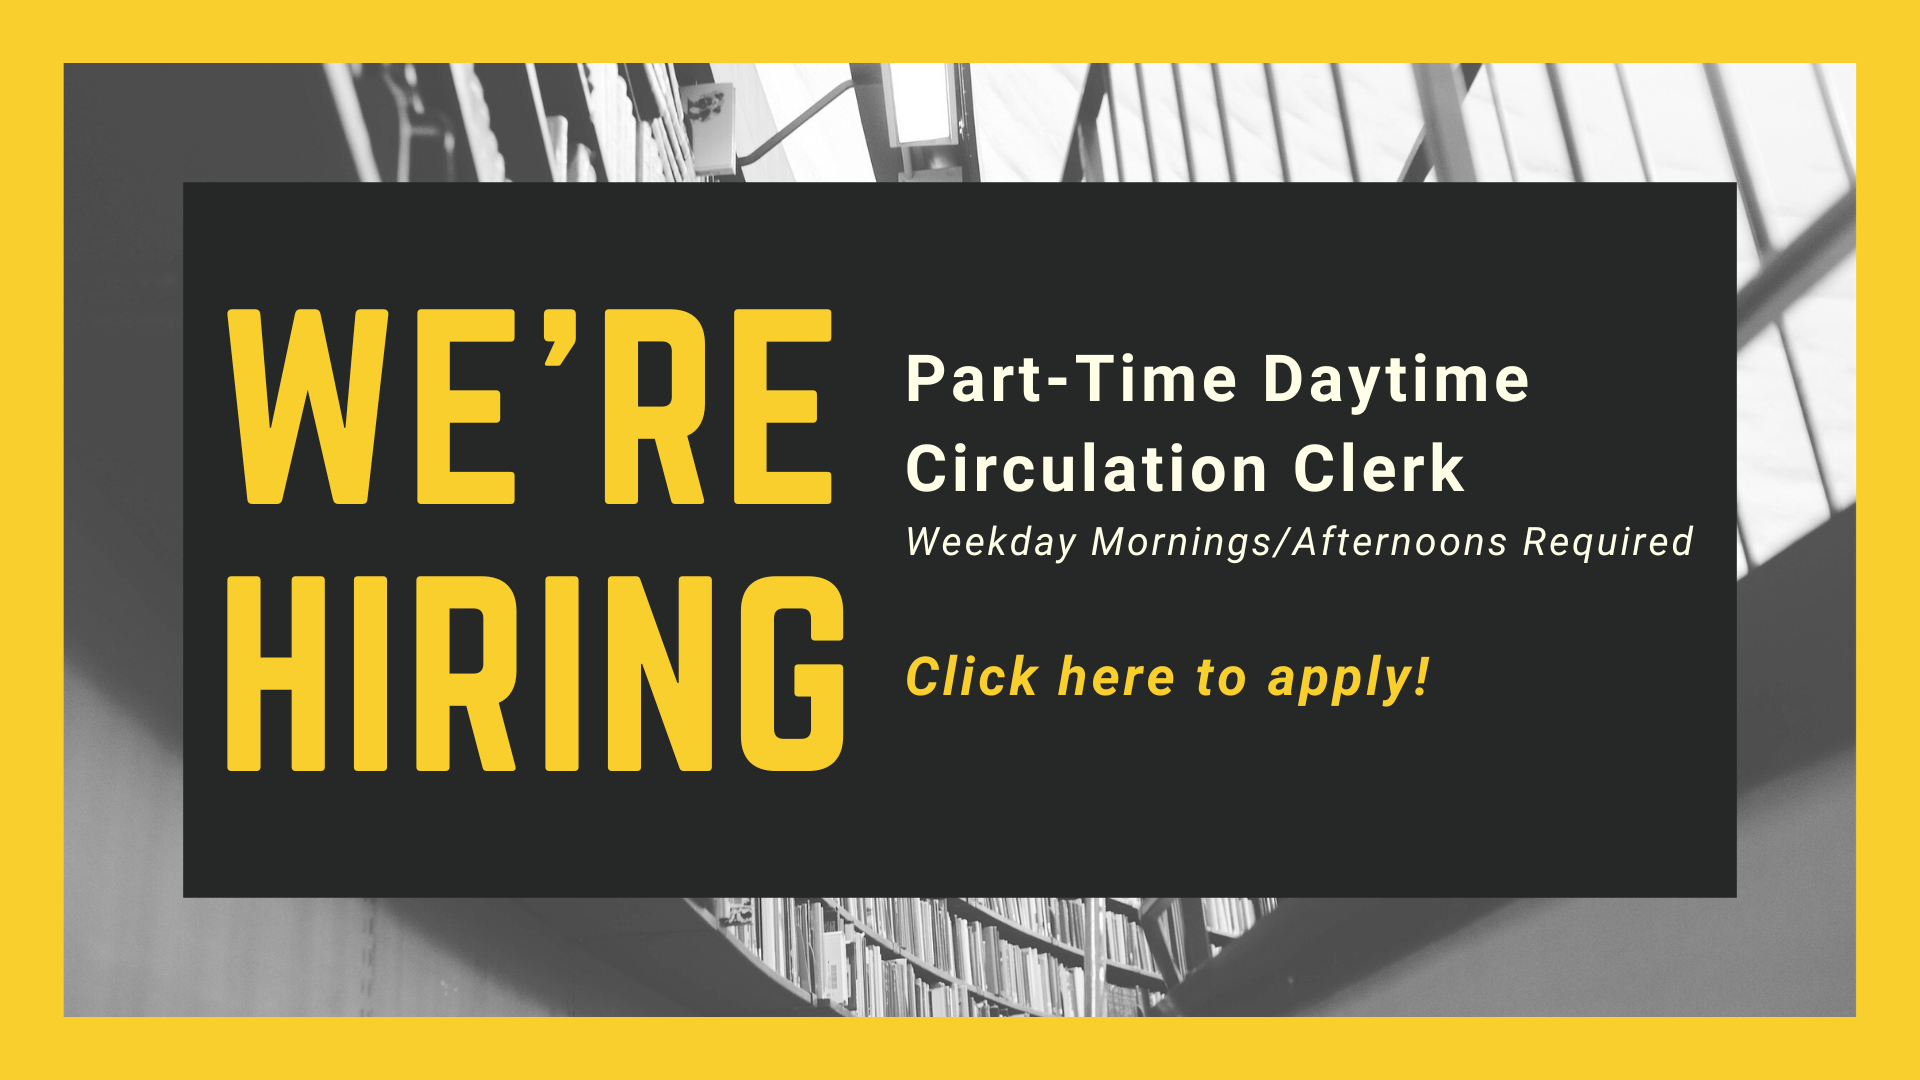 We're hiring!  Part Time Daytime Children's Circulation Clerk. Must work weekday mornings/afternoons.  Click here to apply